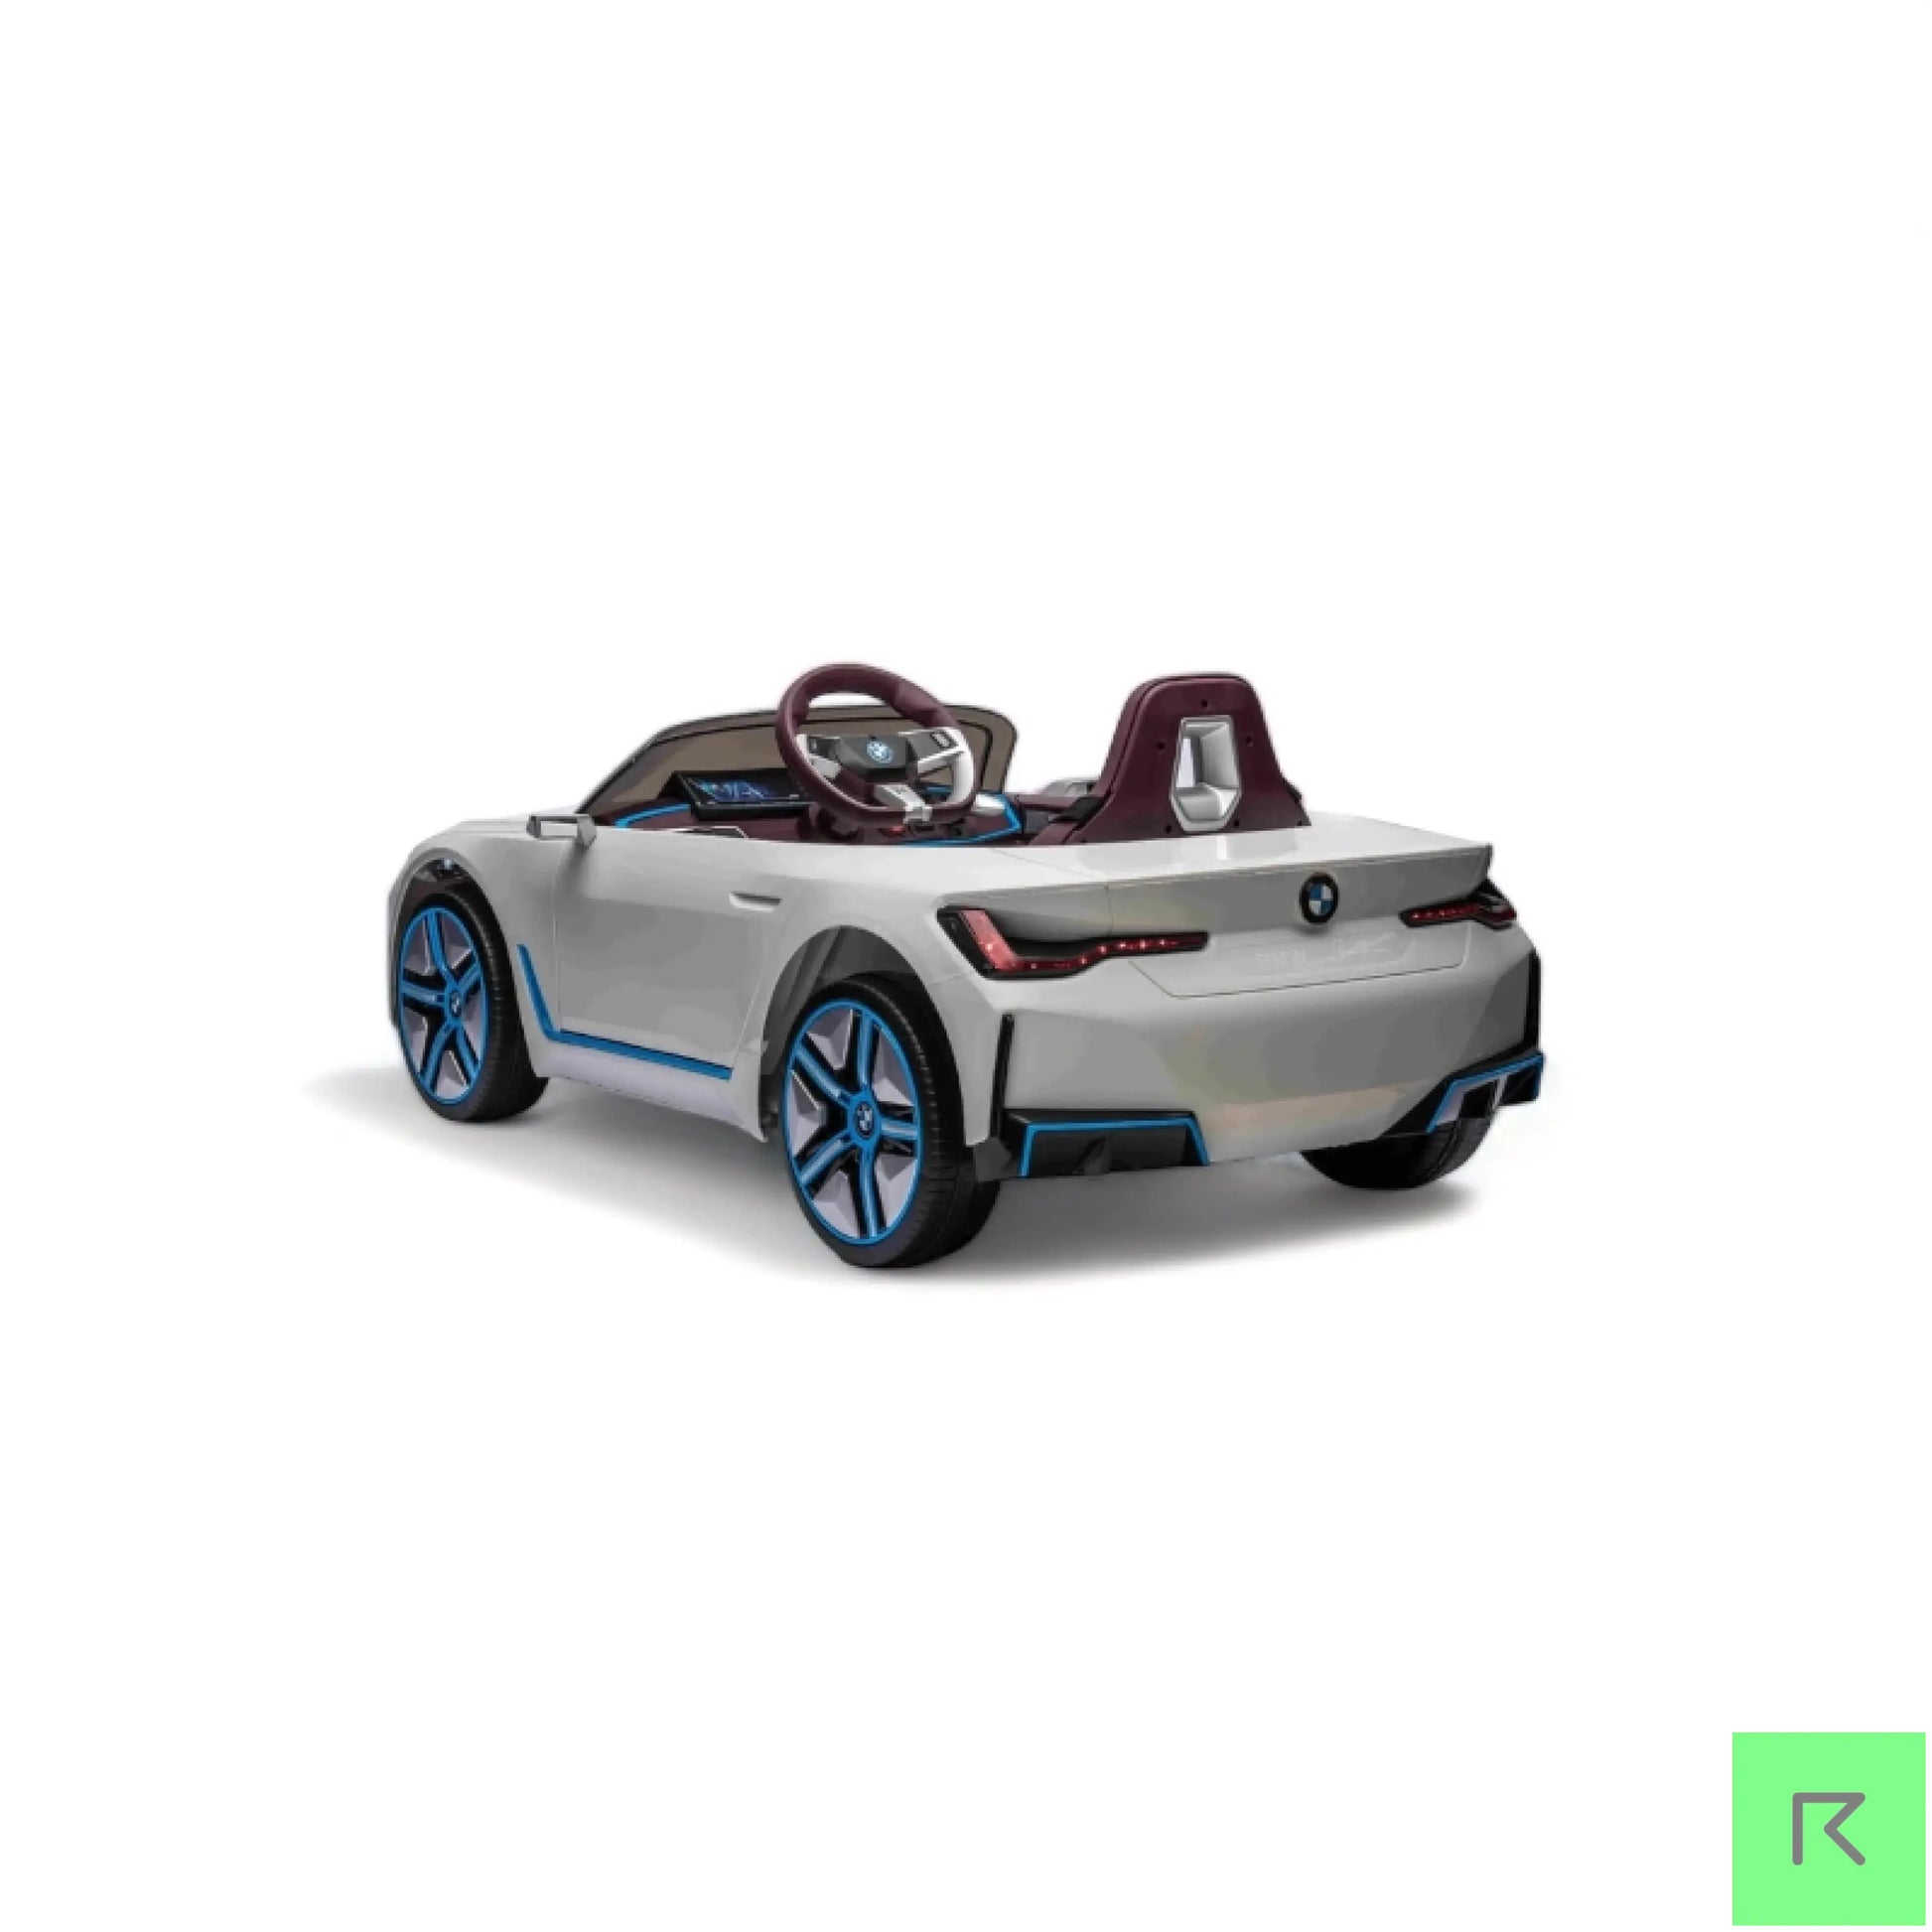 BMW i4 Kids White Electric Ride On Car - KIDS RIDE ON ELECTRIC CAR